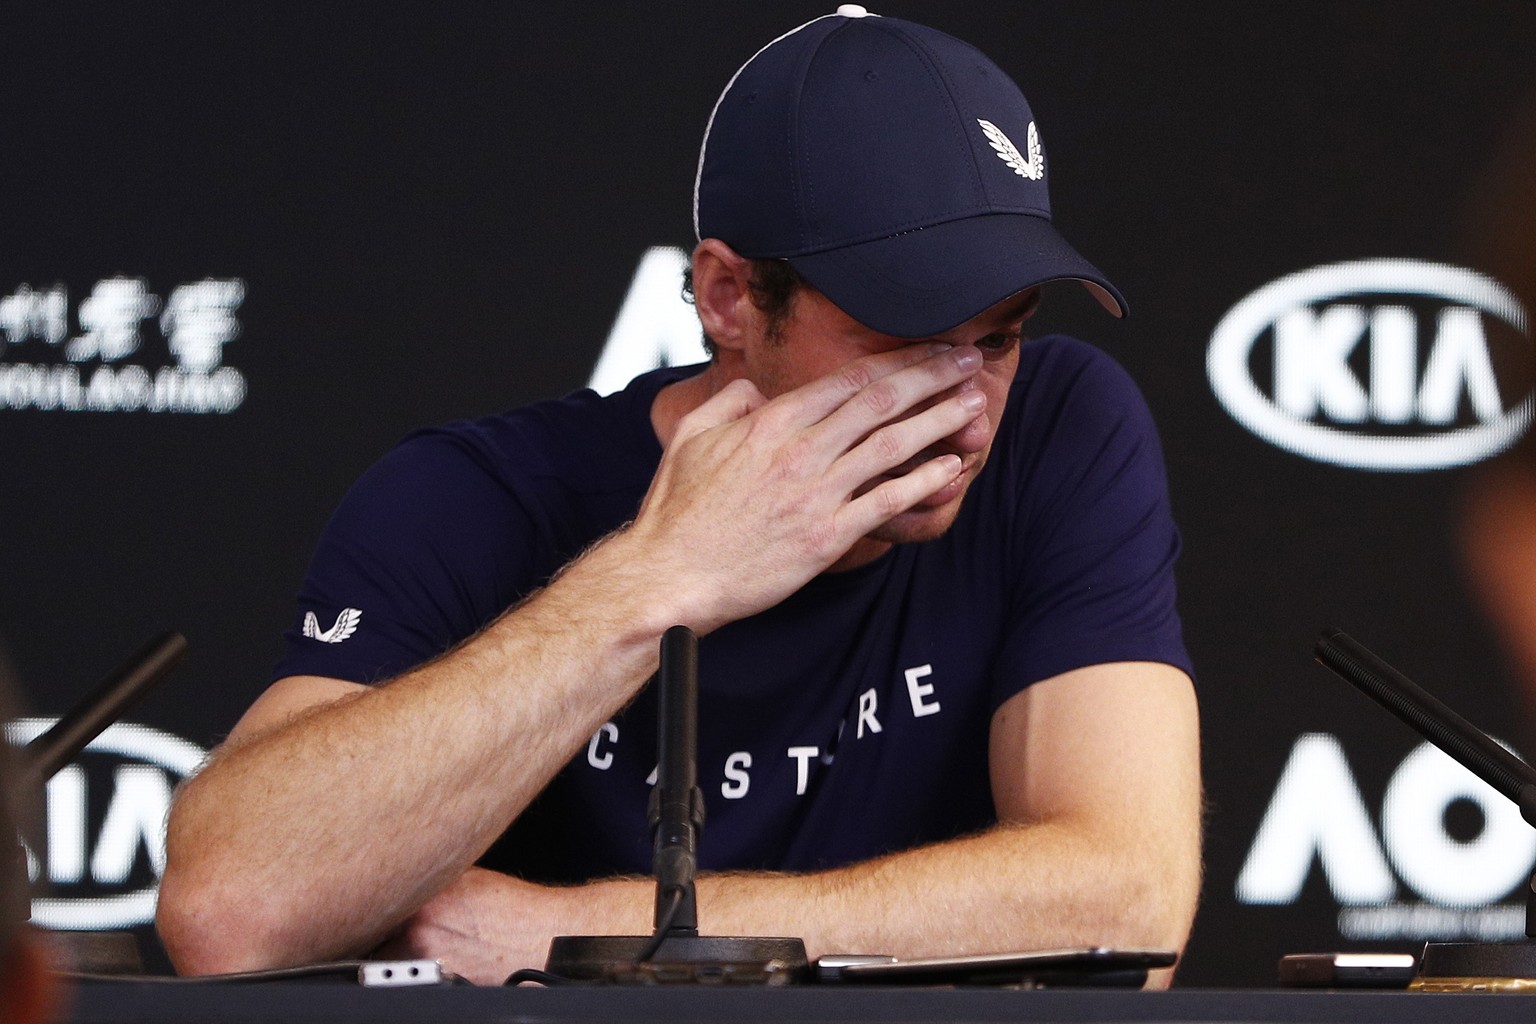 epa07274323 Andy Murray speaks to the media during a press conference at the Australian Open in Melbourne, Australia, 11 January 2019. EPA/DANIEL POCKETT AUSTRALIA AND NEW ZEALAND OUT